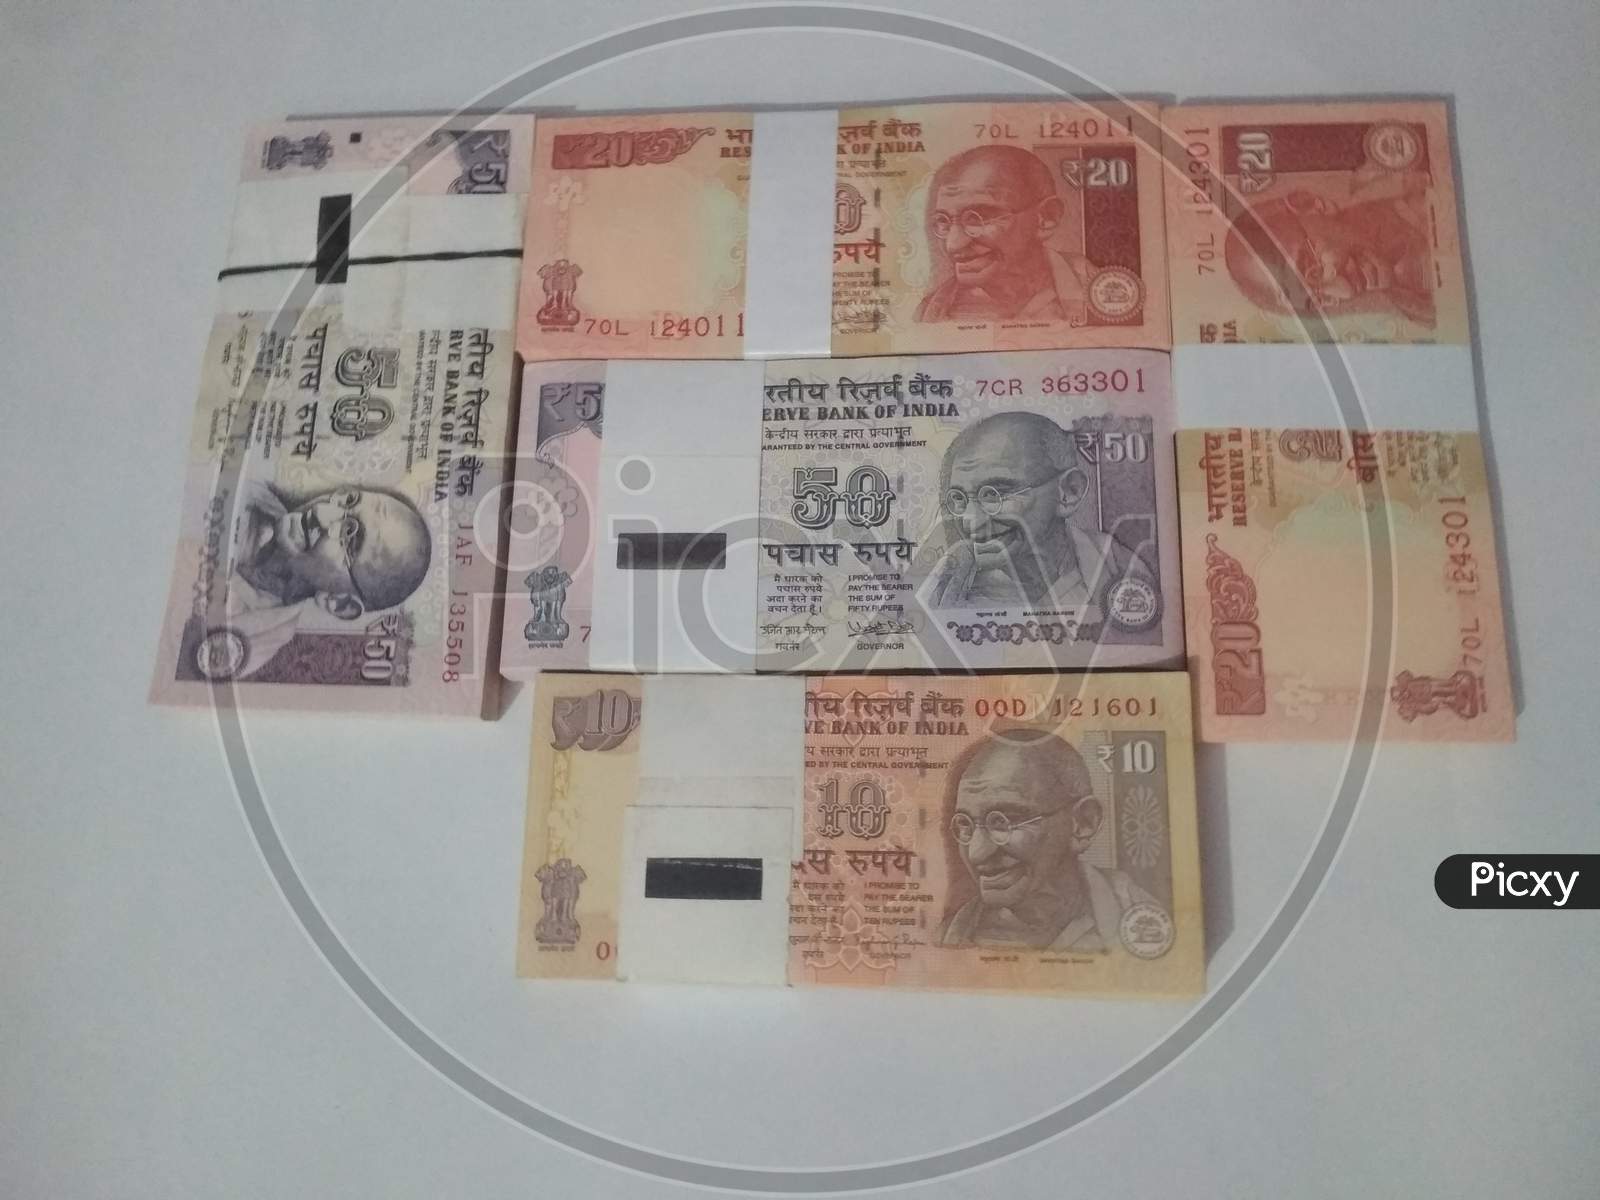 Royal Indian currency